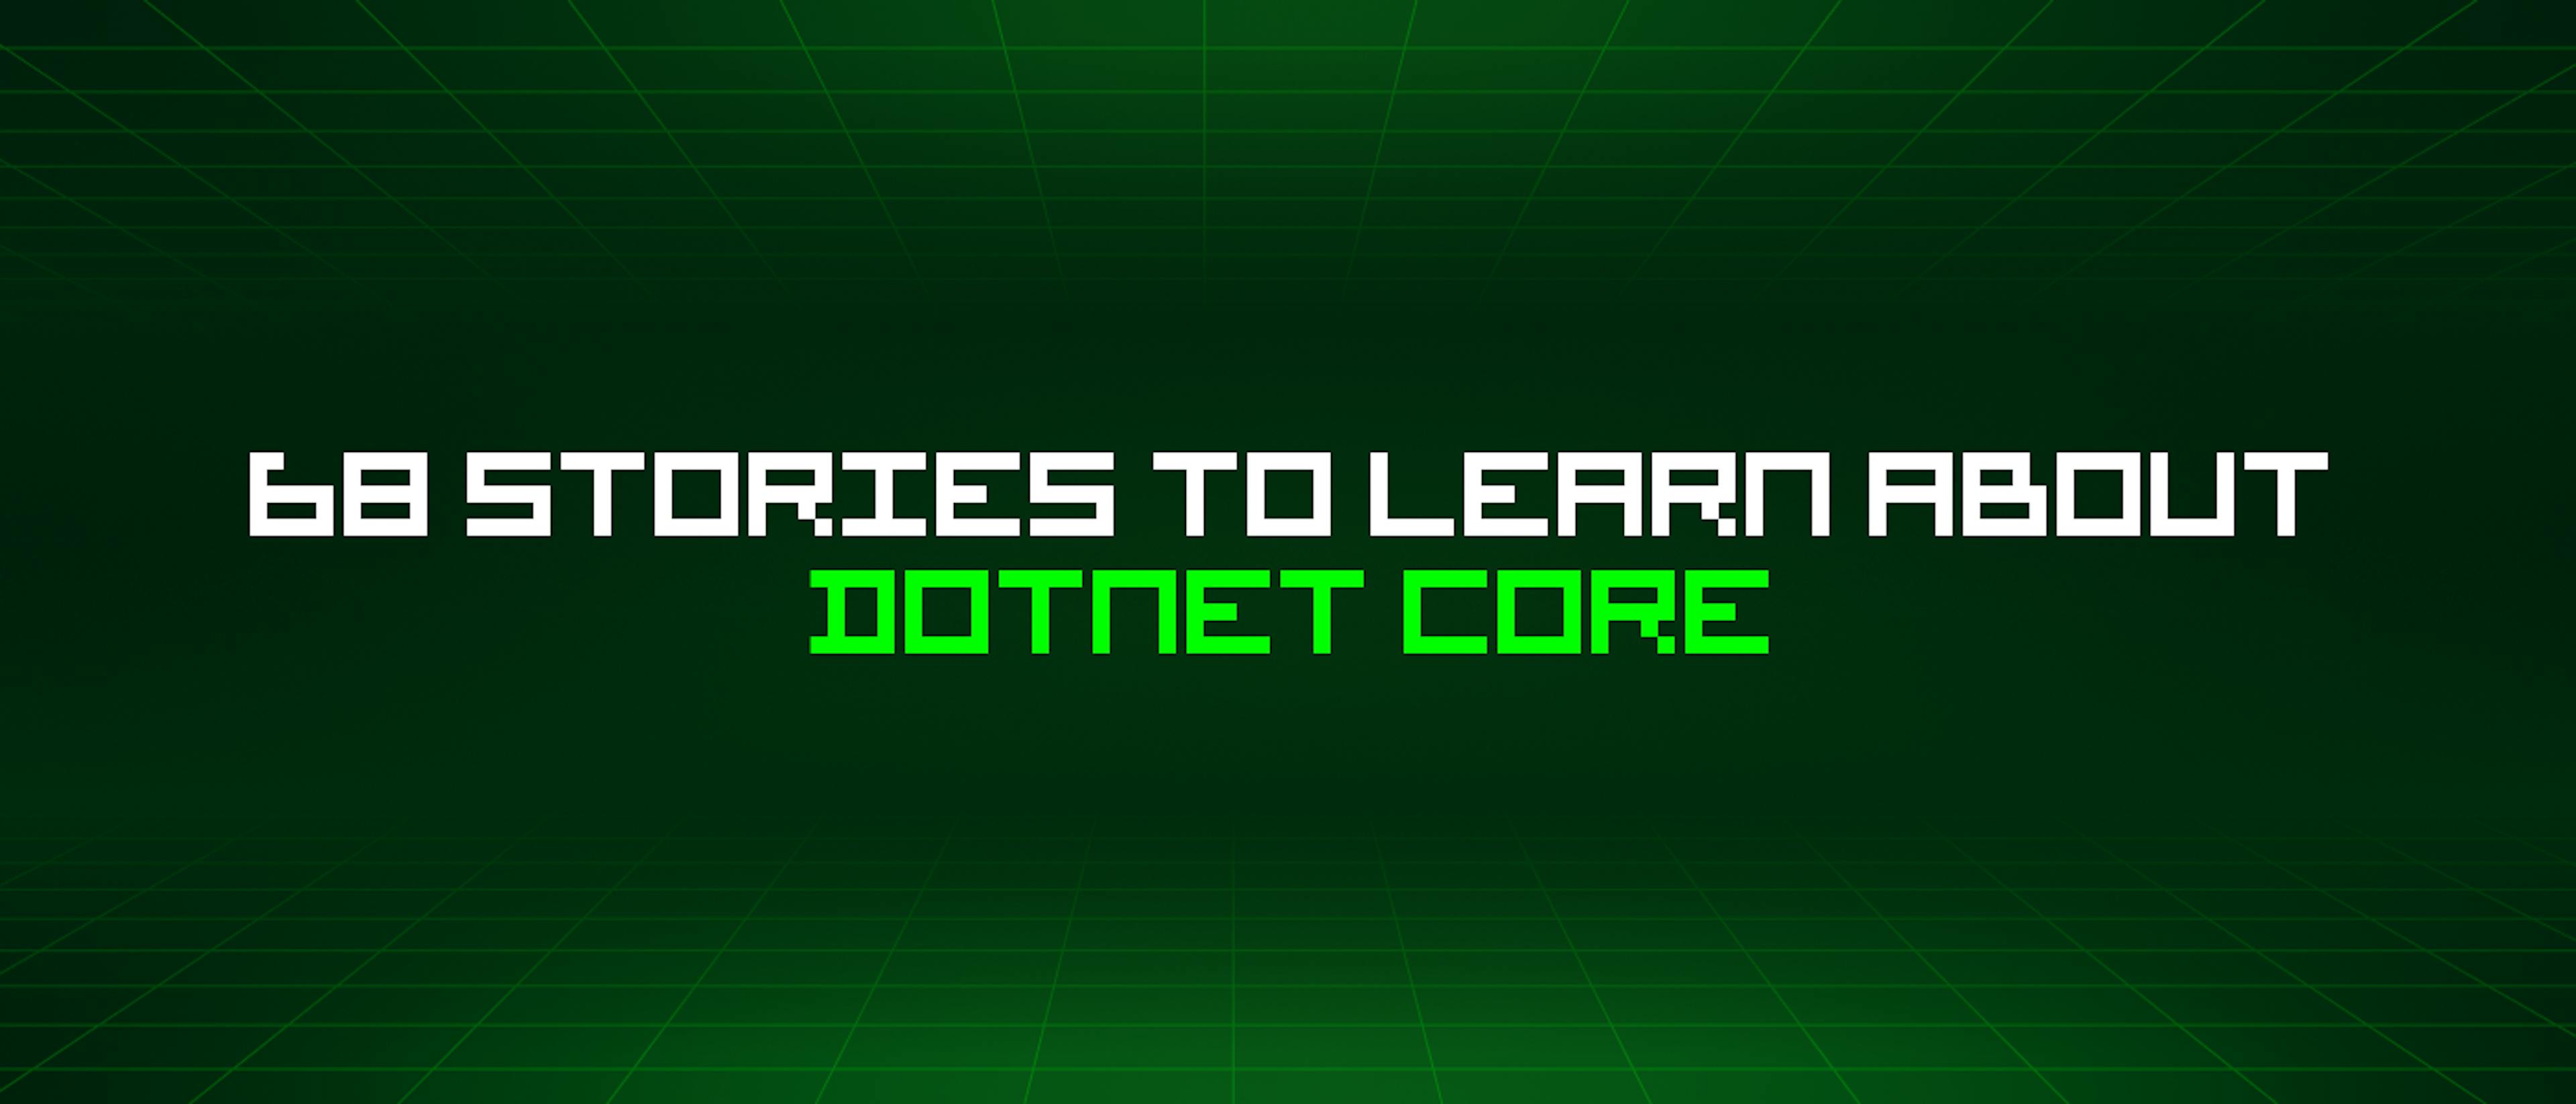 featured image - 68 Stories To Learn About Dotnet Core